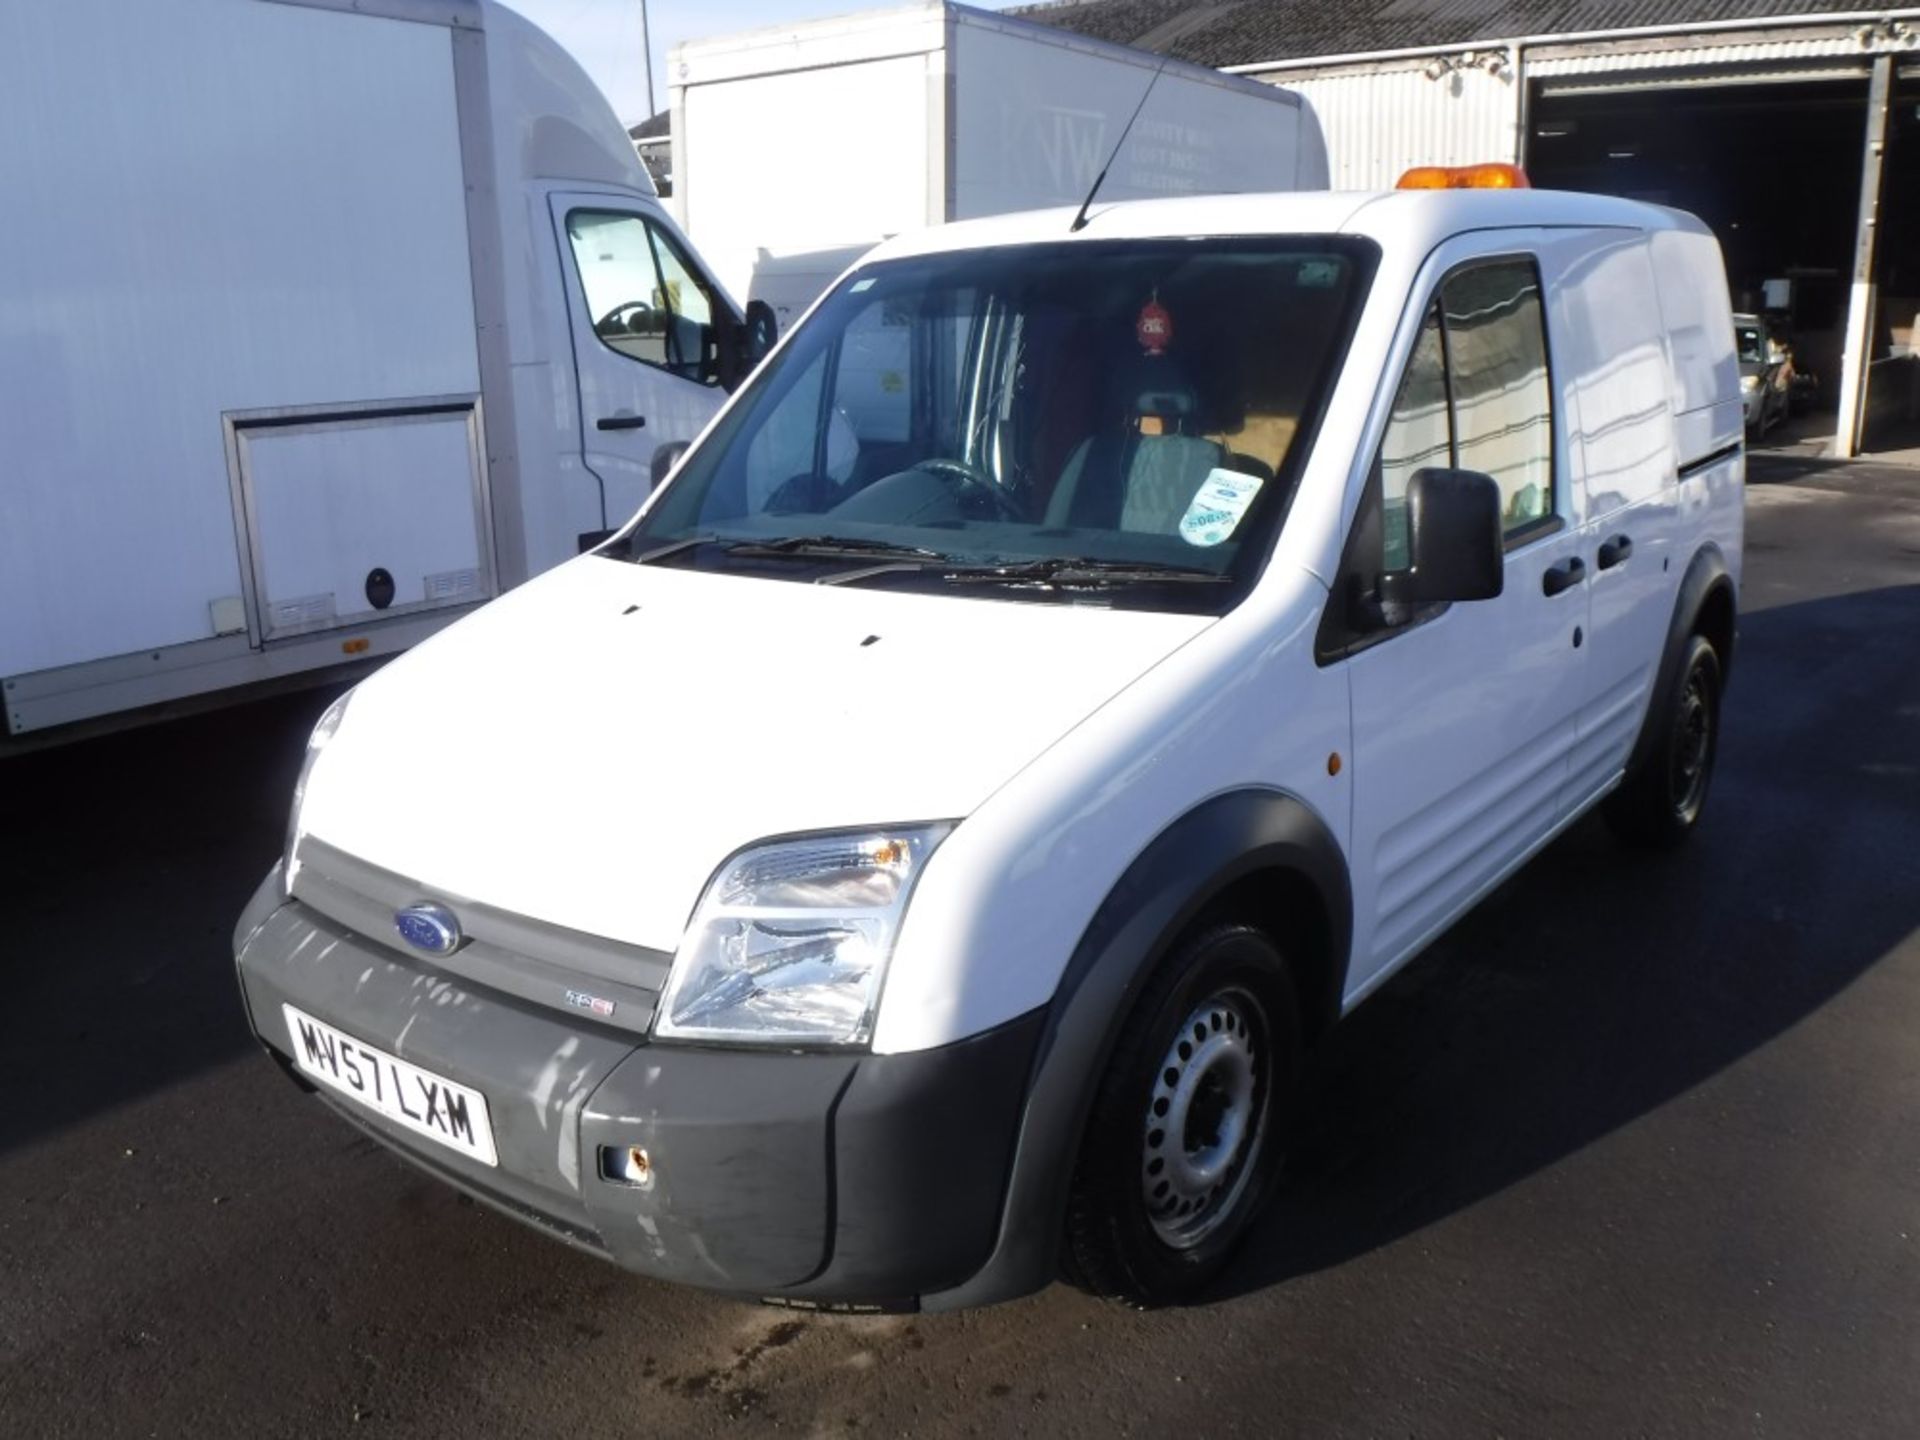 57 reg FORD TRANSIT CONNECT T200 75, 1ST REG 09/07, TEST 09/18, 45790M, V5 HERE, 1 OWNER FROM NEW ( - Image 2 of 5